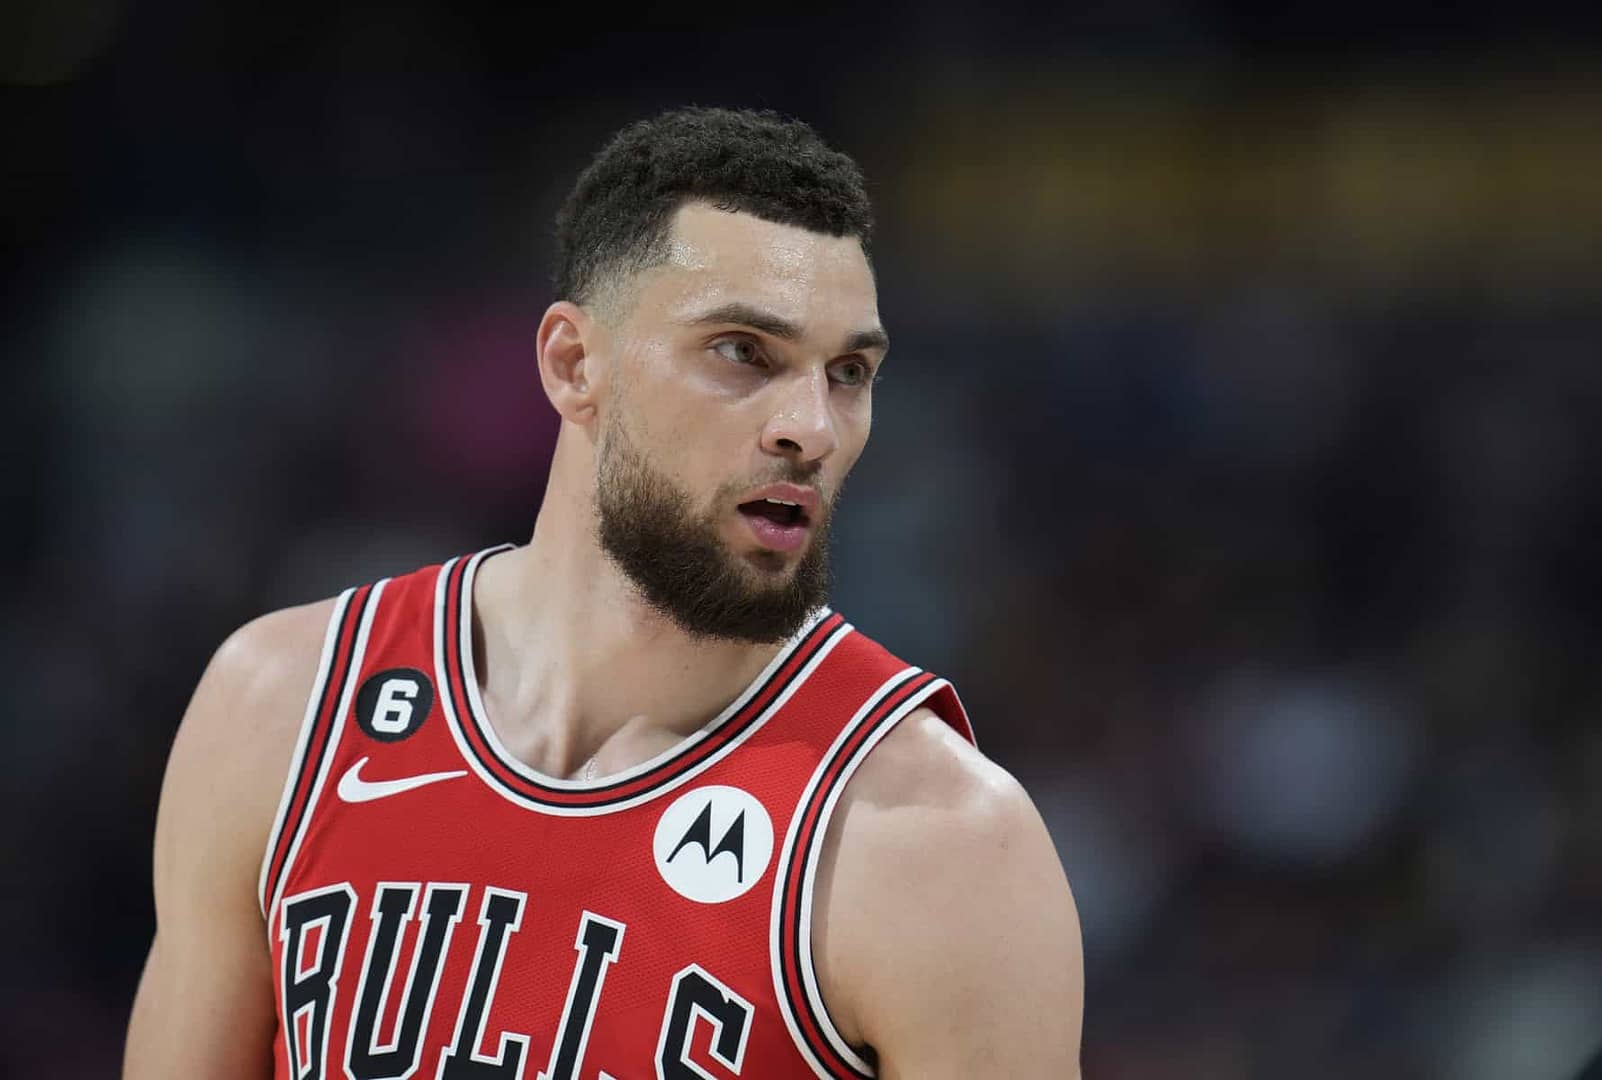 The best NBA player props and picks and bets today for tonight, November 13, include wagers on Zach LaVine and OG Anunoby.